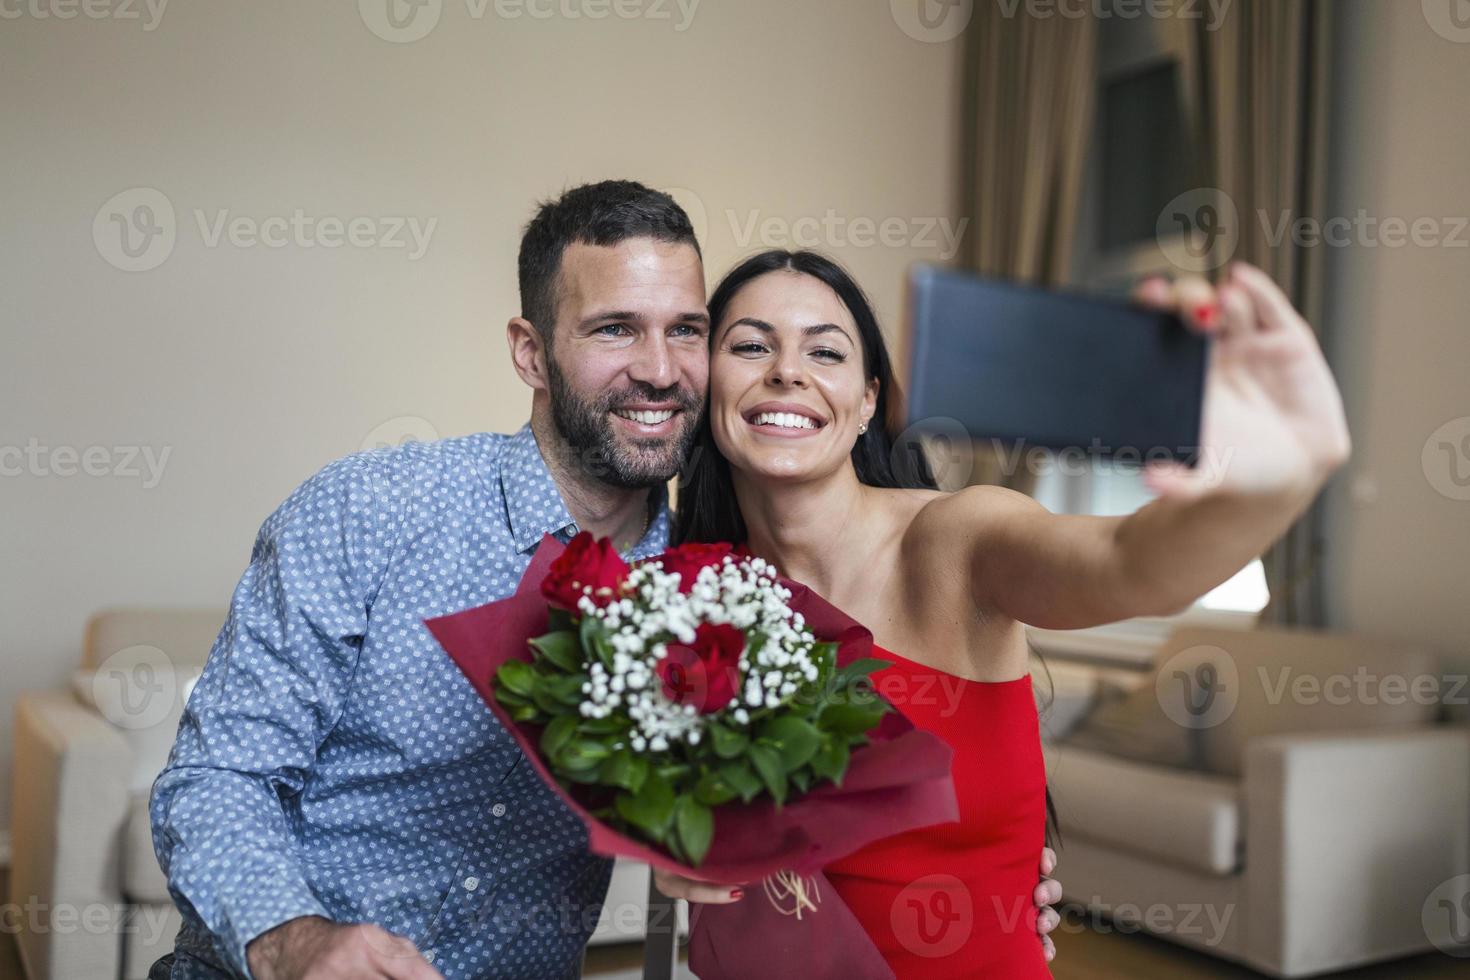 Image of happy young couple taking selfie photo with flowers while having a romantic time at home. Lovely couple celebrating Valentine's Day